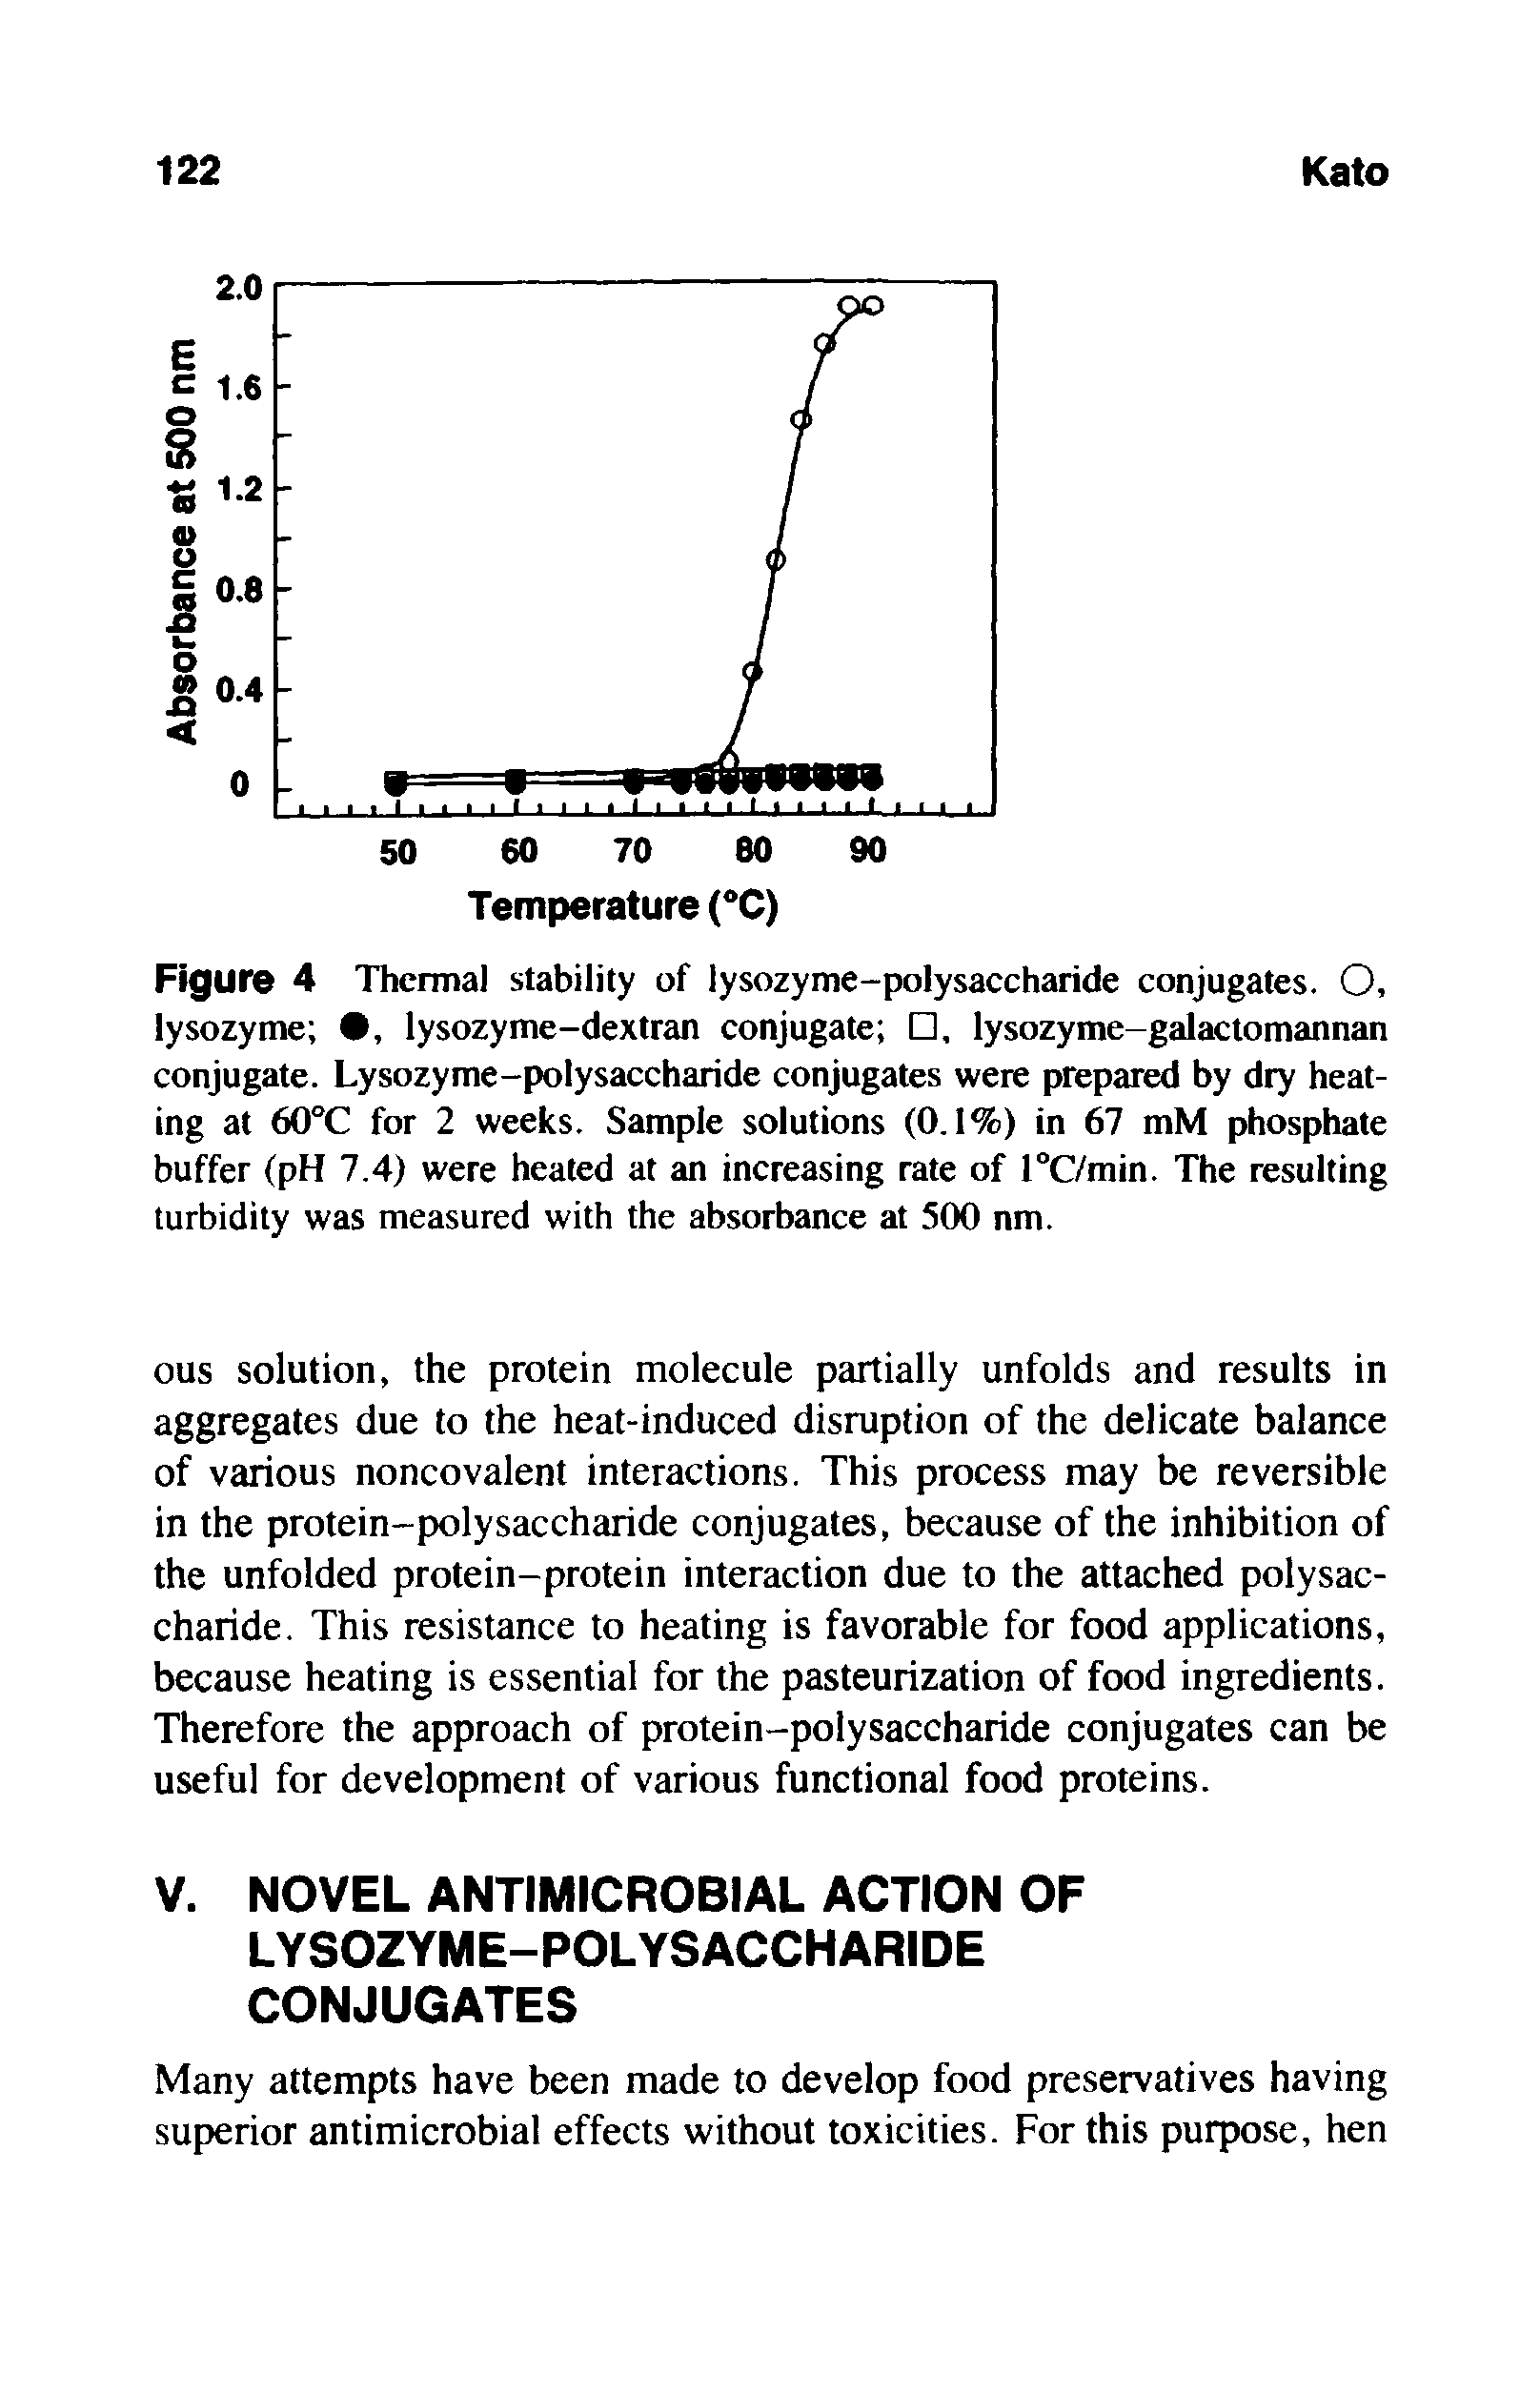 Figure 4 Thermal stability of lysozyme-polysaccharide conjugates. O, lysozyme , lysozyme-dextran conjugate , lysozyme-galactomannan conjugate. Lysozyme-polysaccharide conjugates were prepared by dry heating at 60°C for 2 weeks. Sample solutions (0.1%) in 67 mM phosphate buffer (pH 7.4) were heated at an increasing rate of l°C/min. The resulting turbidity was measured with the absorbance at 500 nm.